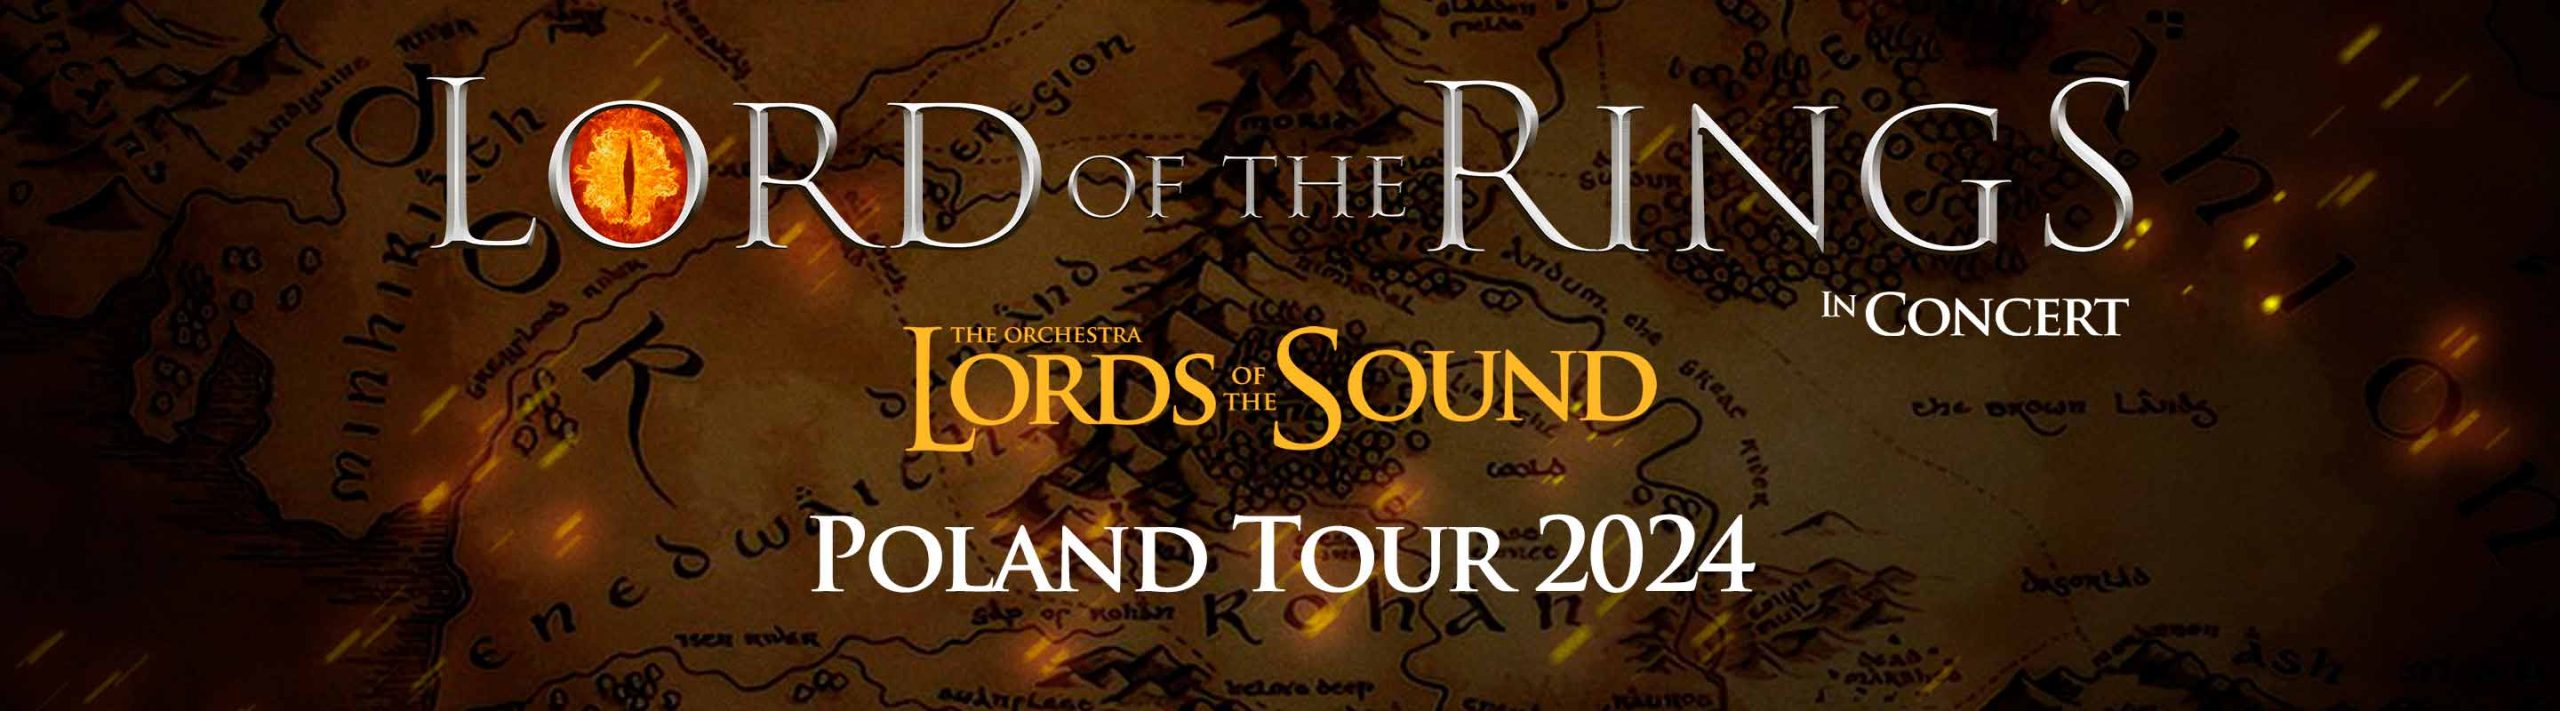 LORD OF THE RINGS – LORDS OF THE SOUND ORCHESTRA (POLAND TOUR 2024)